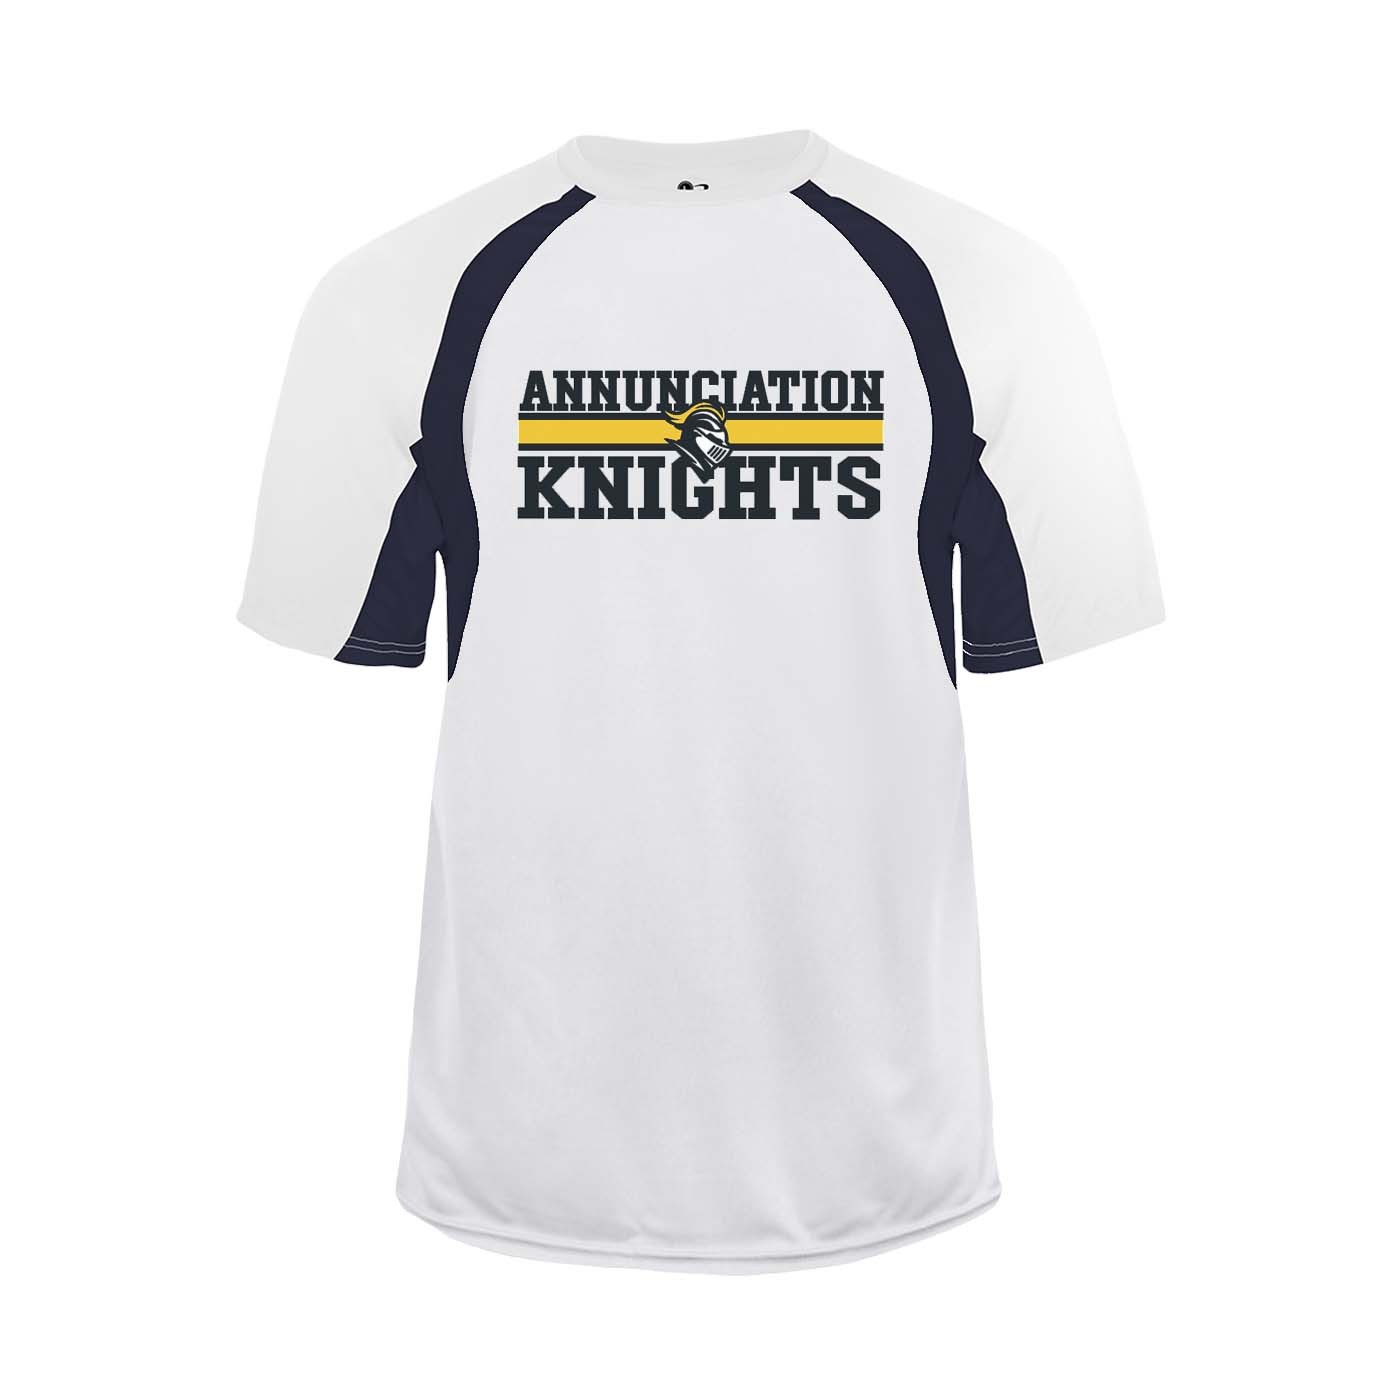 ANN Spirit Hook S/S T-Shirt w/ Annunciation Knights Logo - Please Allow 2-3 Weeks for Delivery